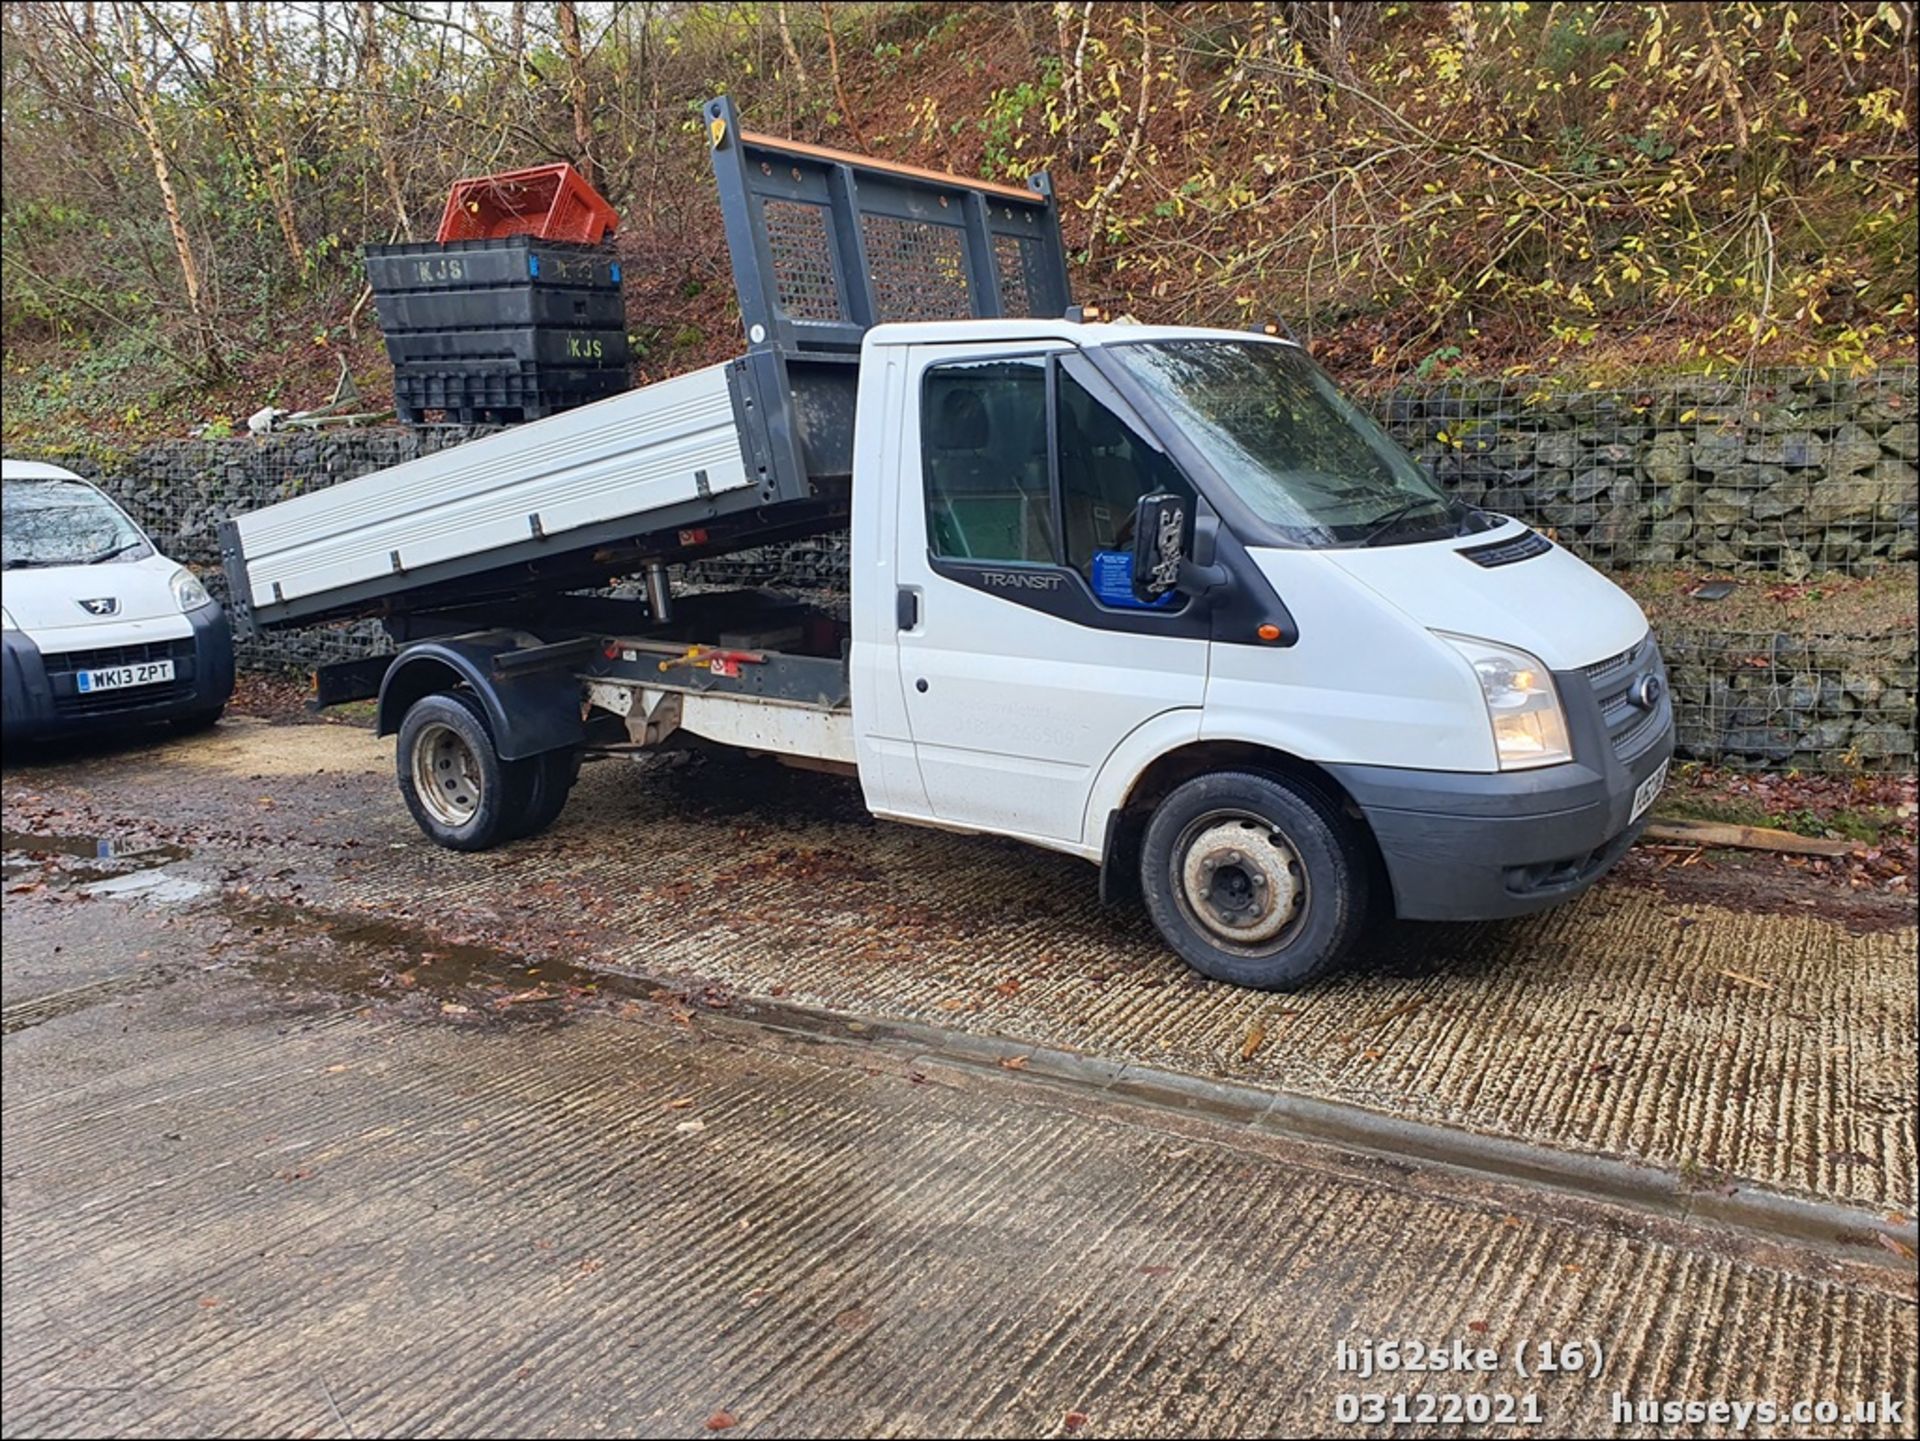 12/62 FORD TRANSIT 125 T350 RWD - 2198cc 2dr Tipper (White, 133k) - Image 16 of 16